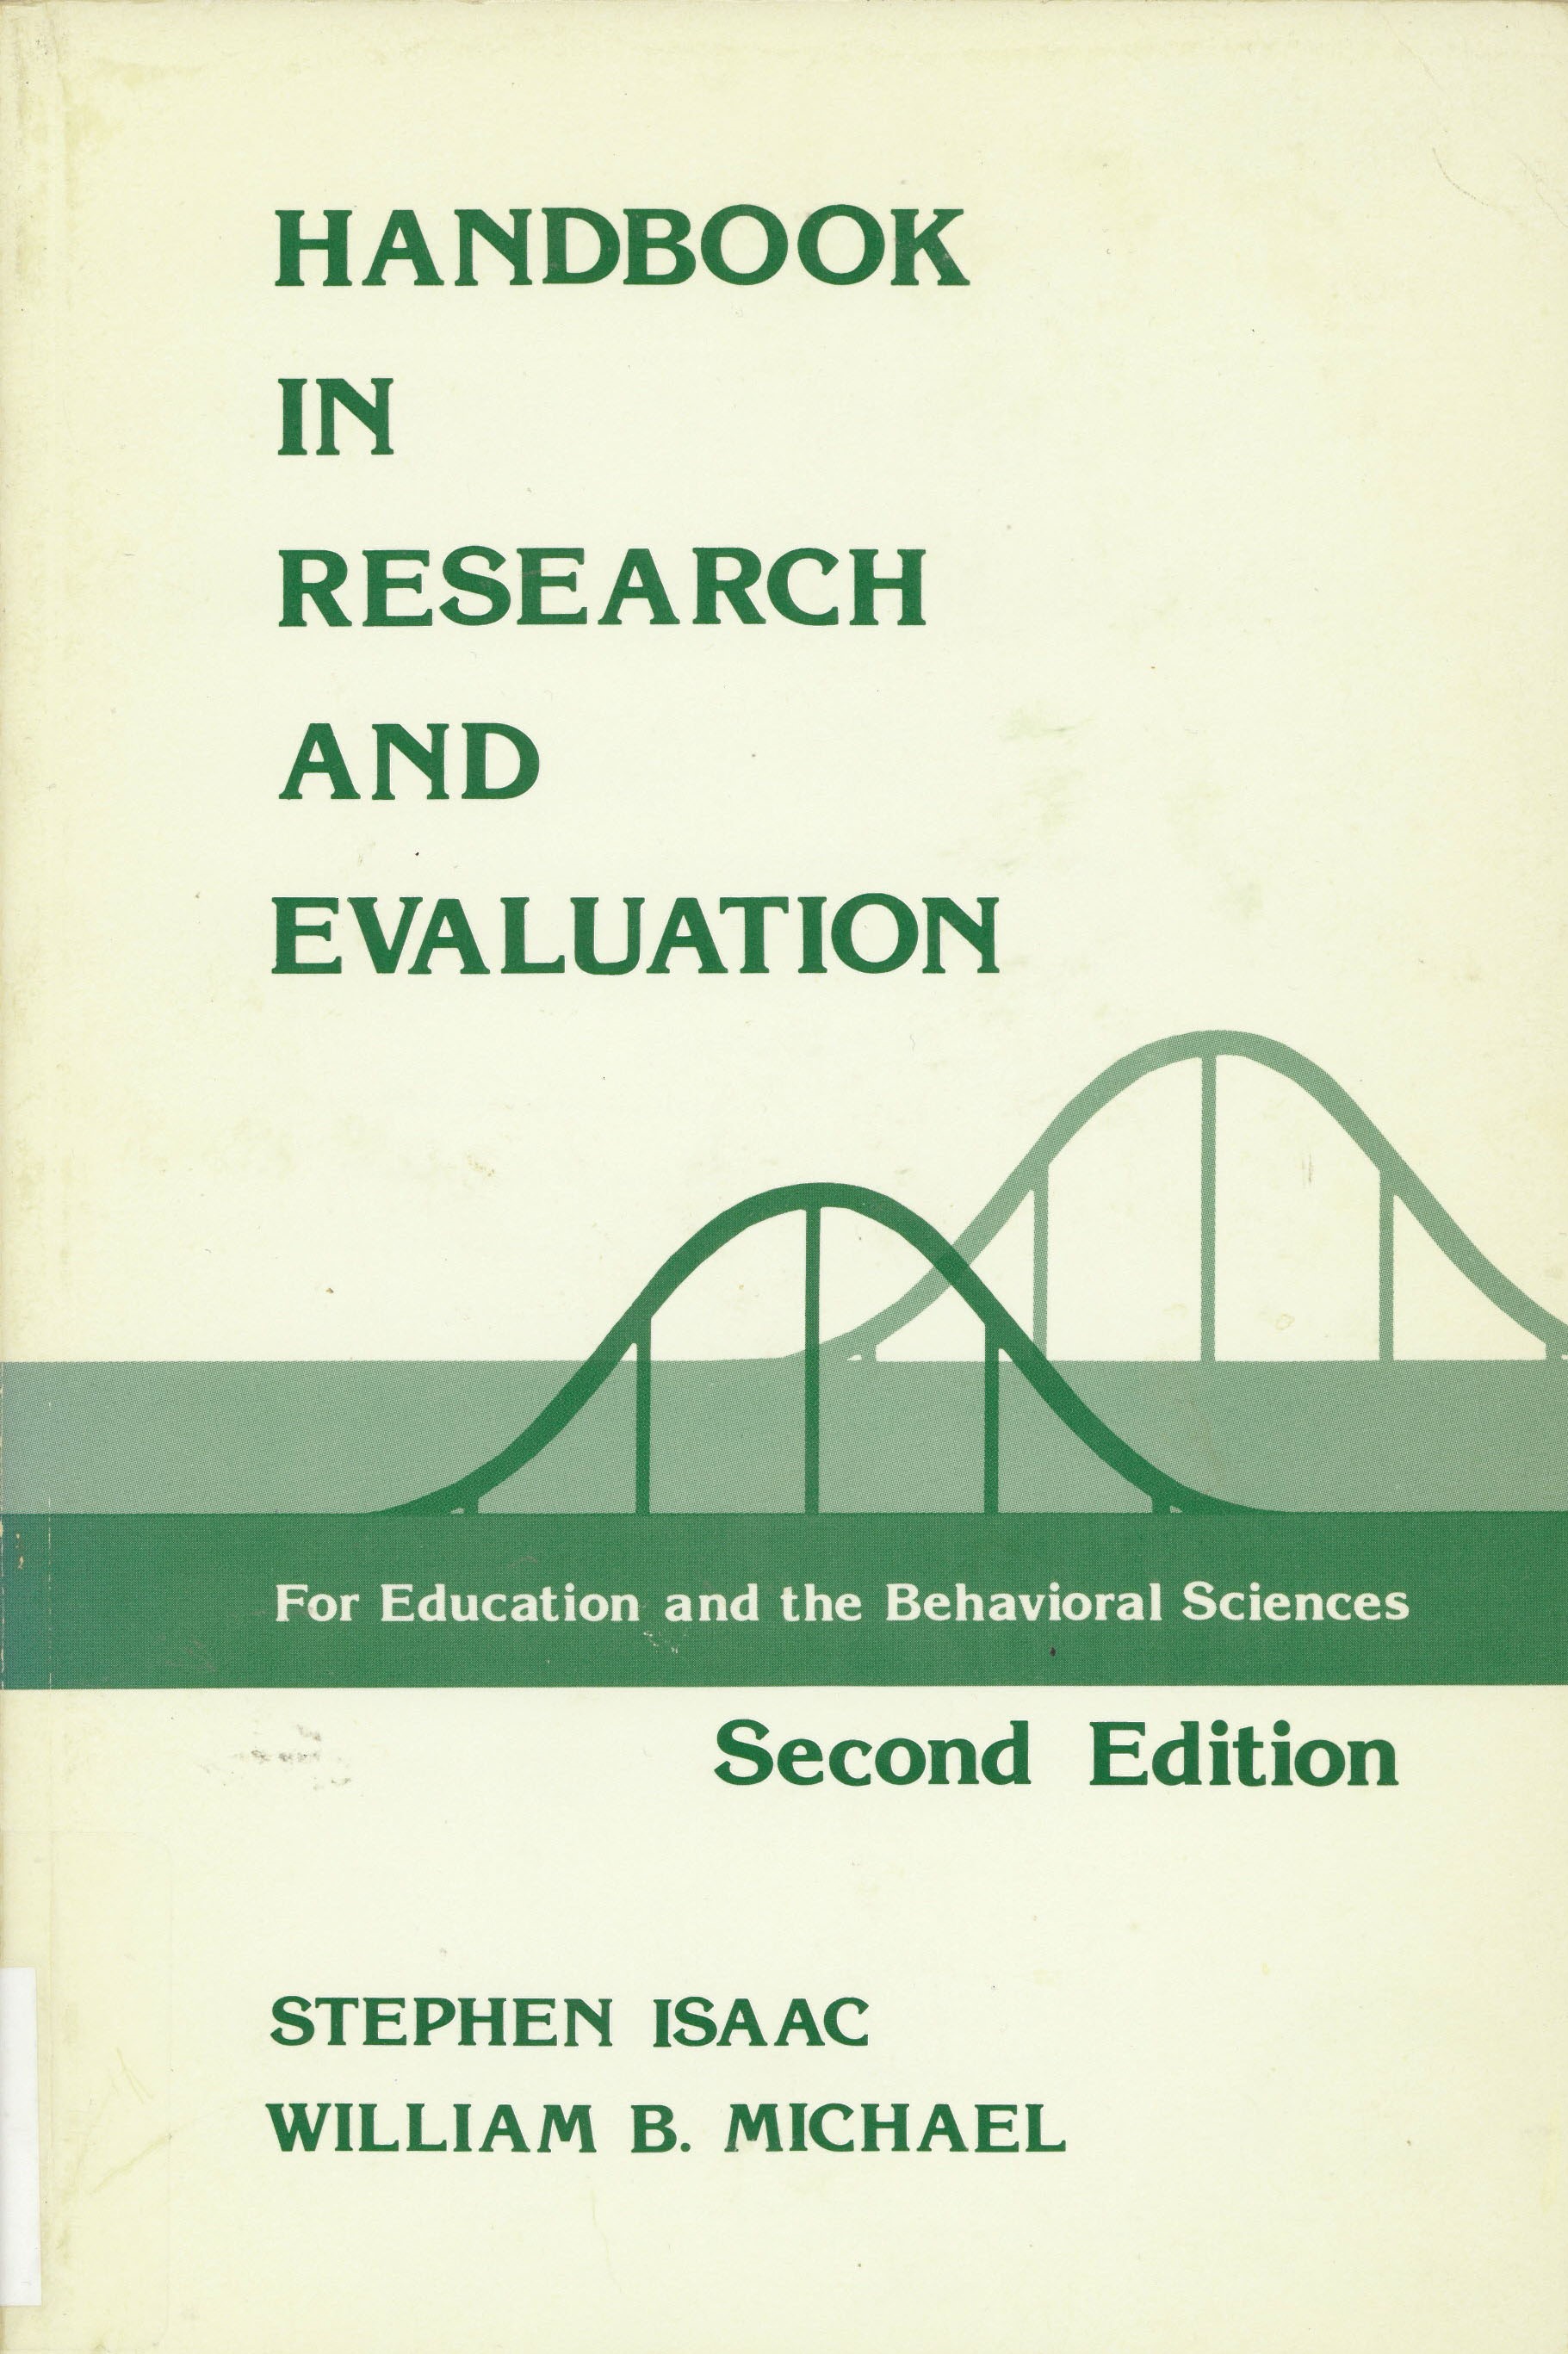 Handbook in research and evaluation : a collection of principles, methods, and strategies useful in the planning, design, and evaluation of studies in education and the behavioral sciences